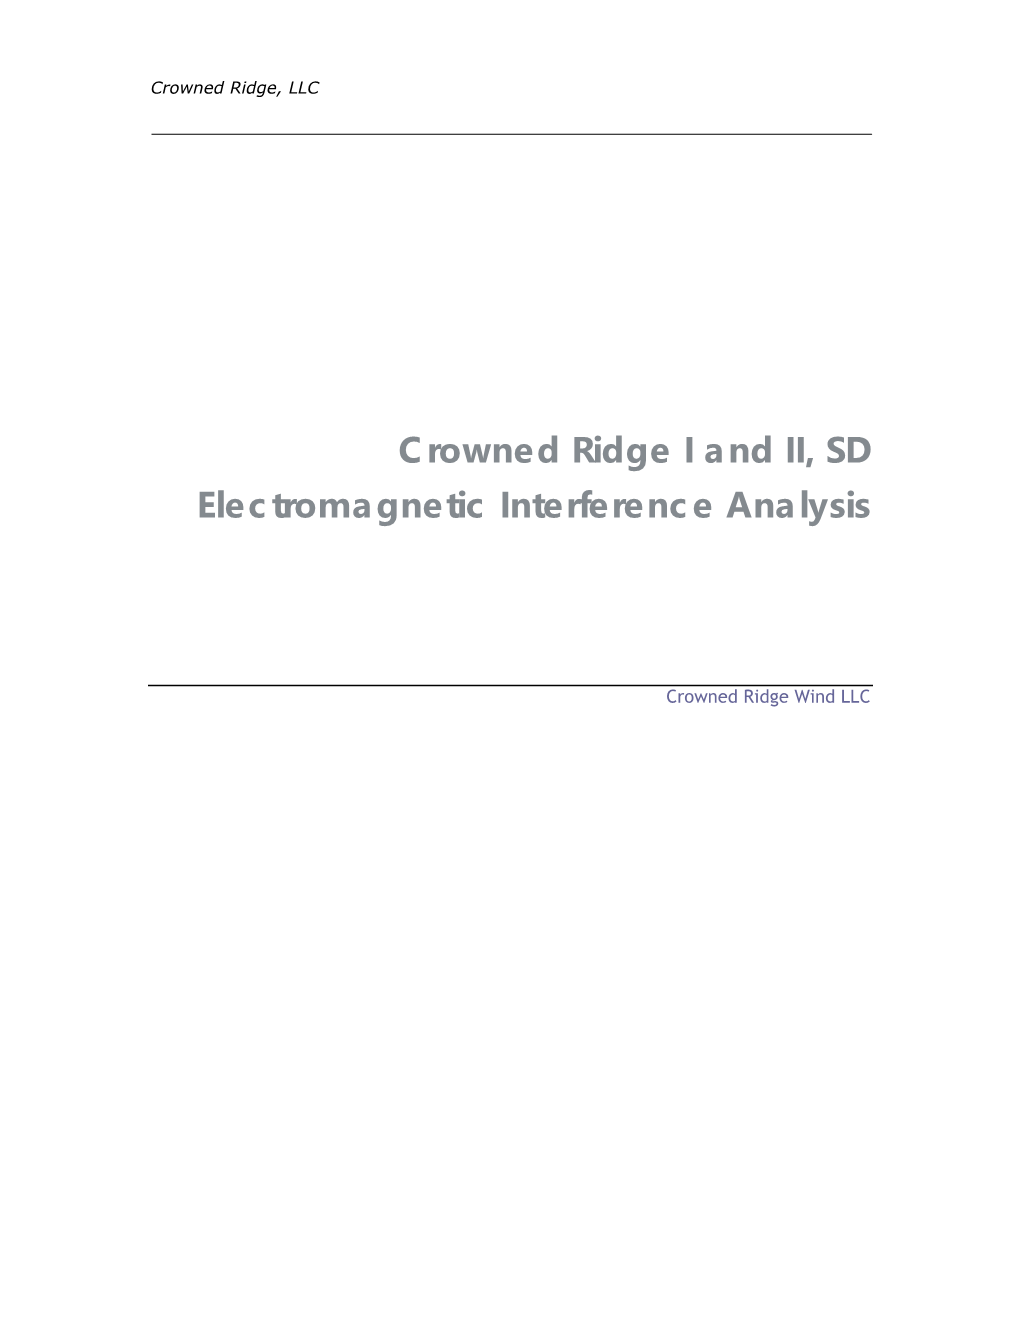 Crowned Ridge I and II, SD Electromagnetic Interference Analysis